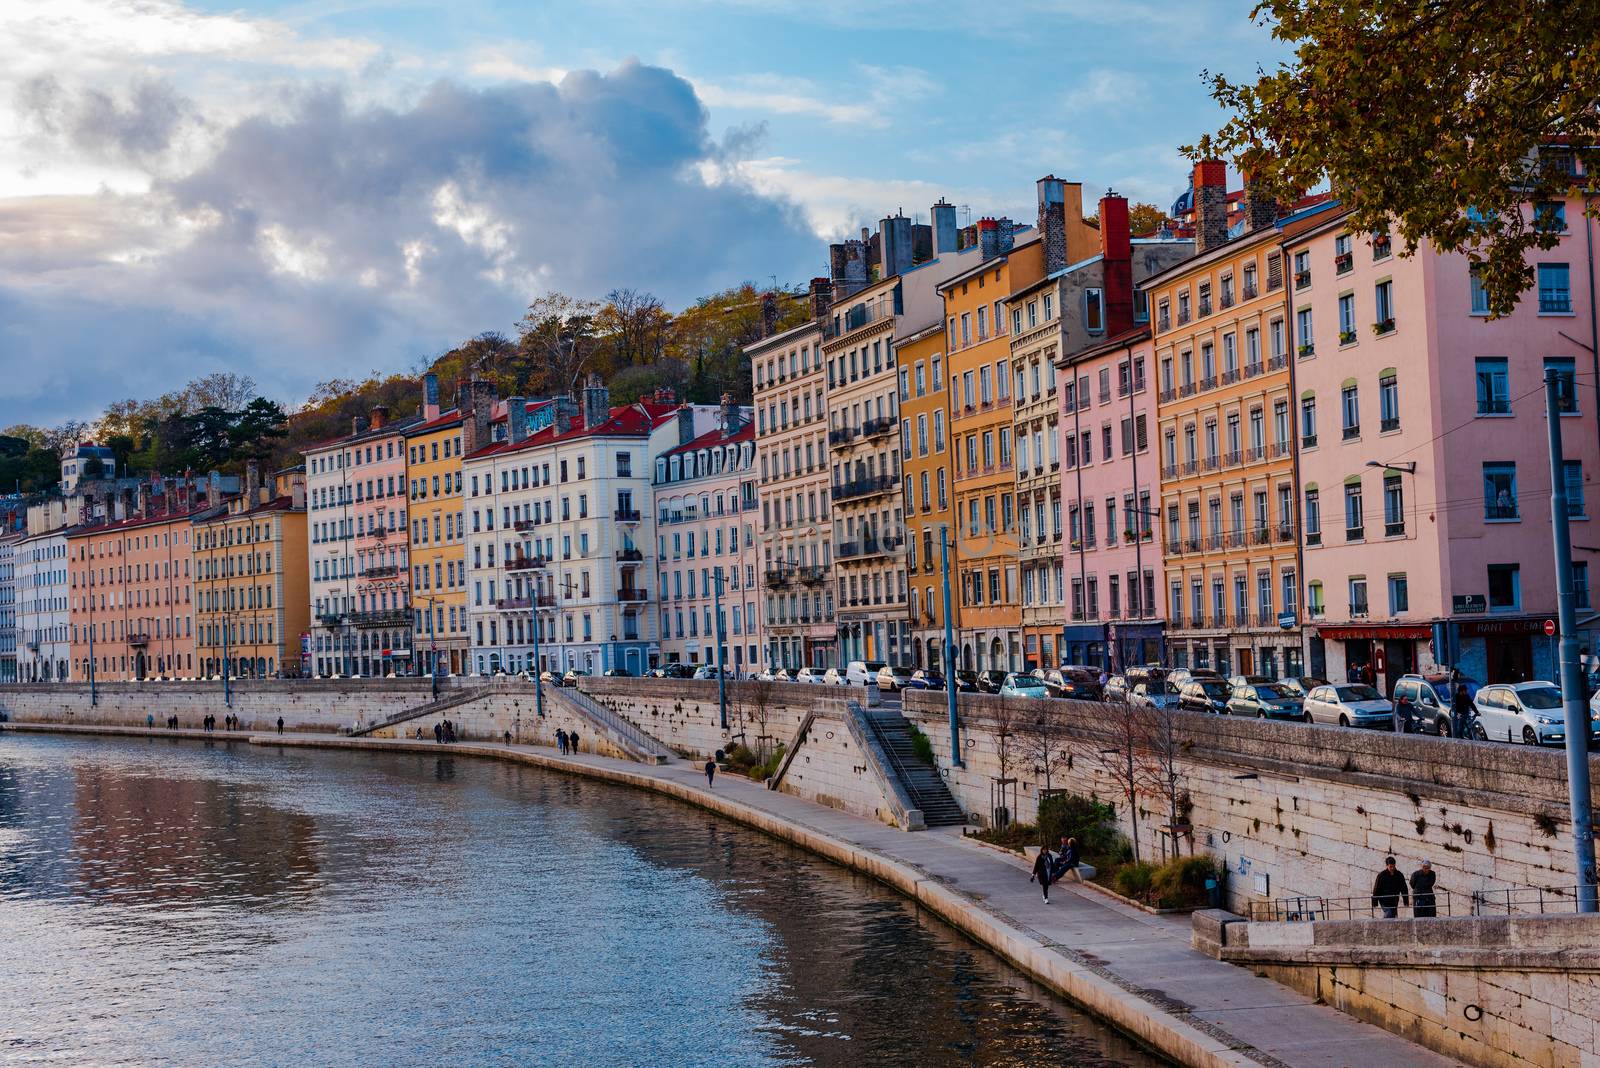 On the Banks of the Saone River in Lyon by jfbenning